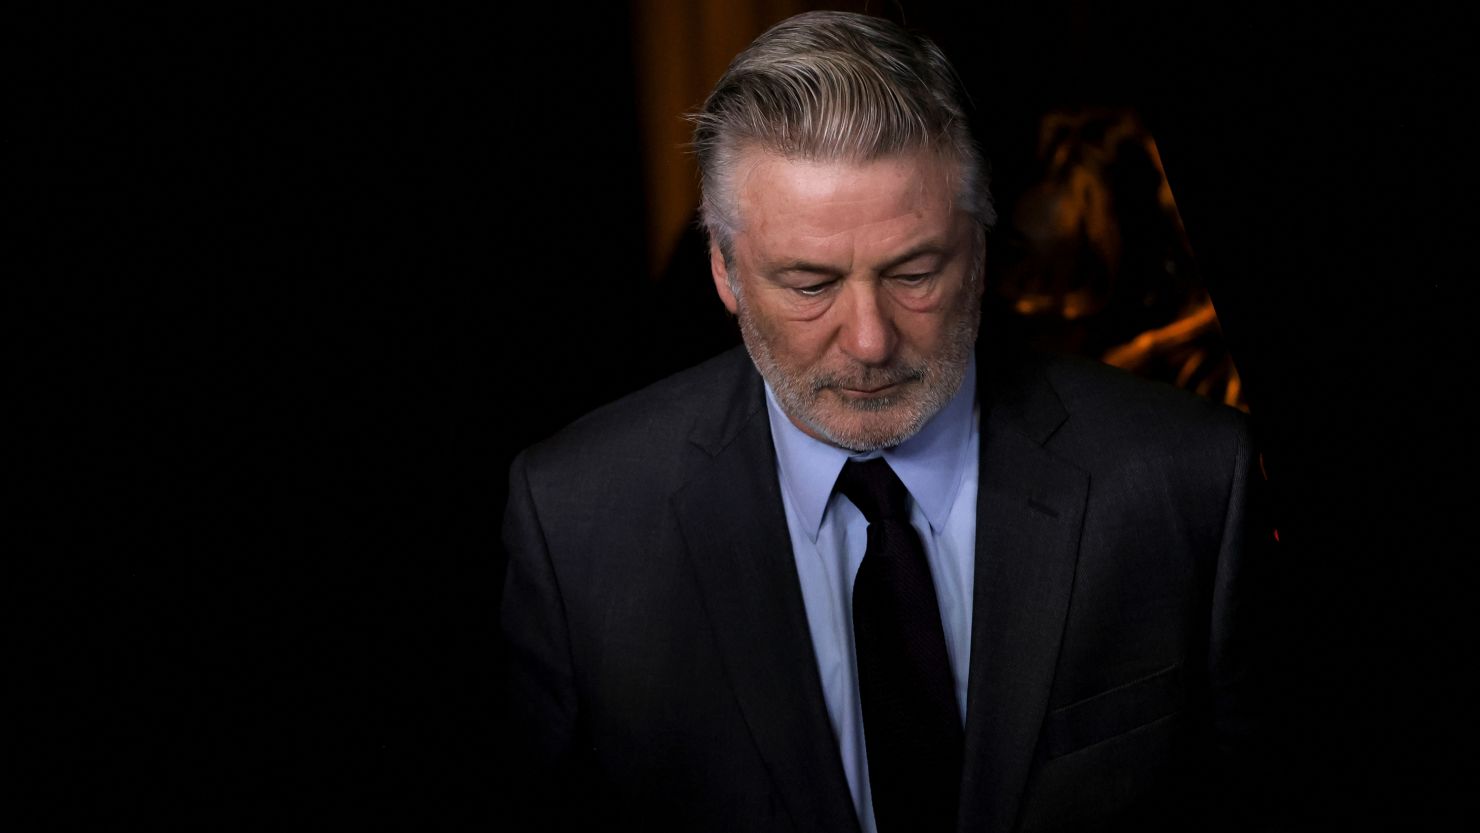 Alec Baldwin attends an event in New York City on December 6, 2022.